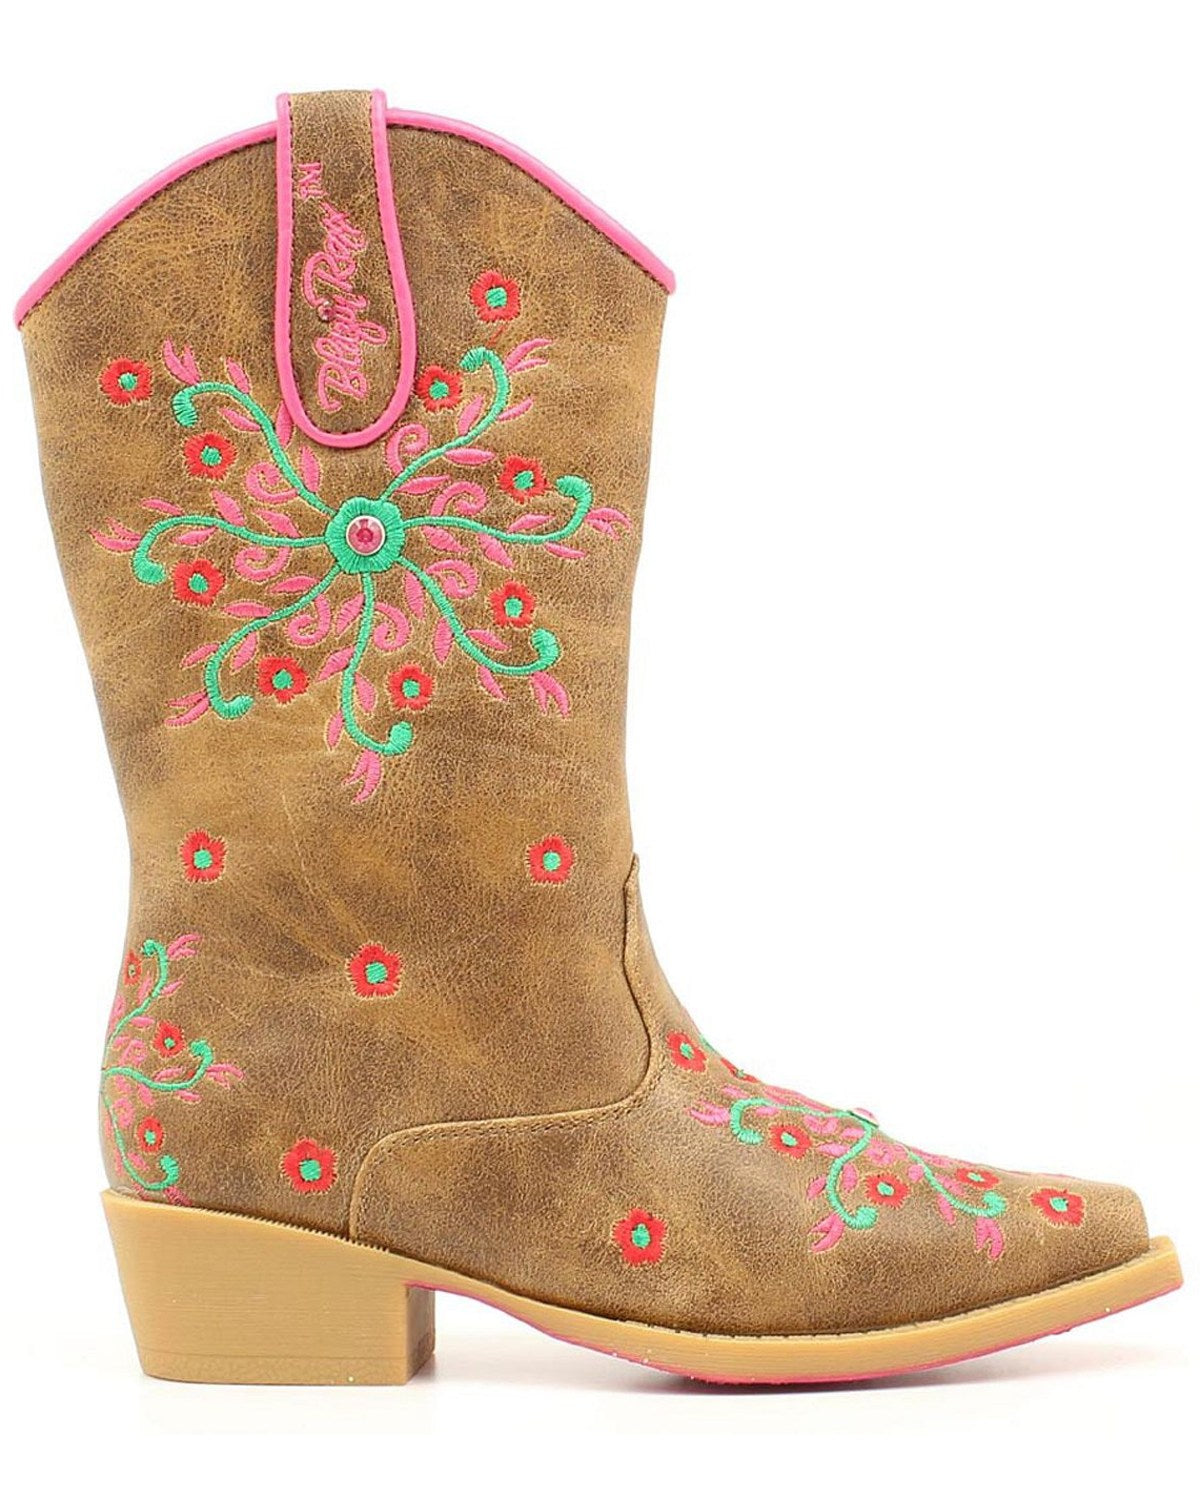 Girls Savvy Embroidered Cowgirl Boots